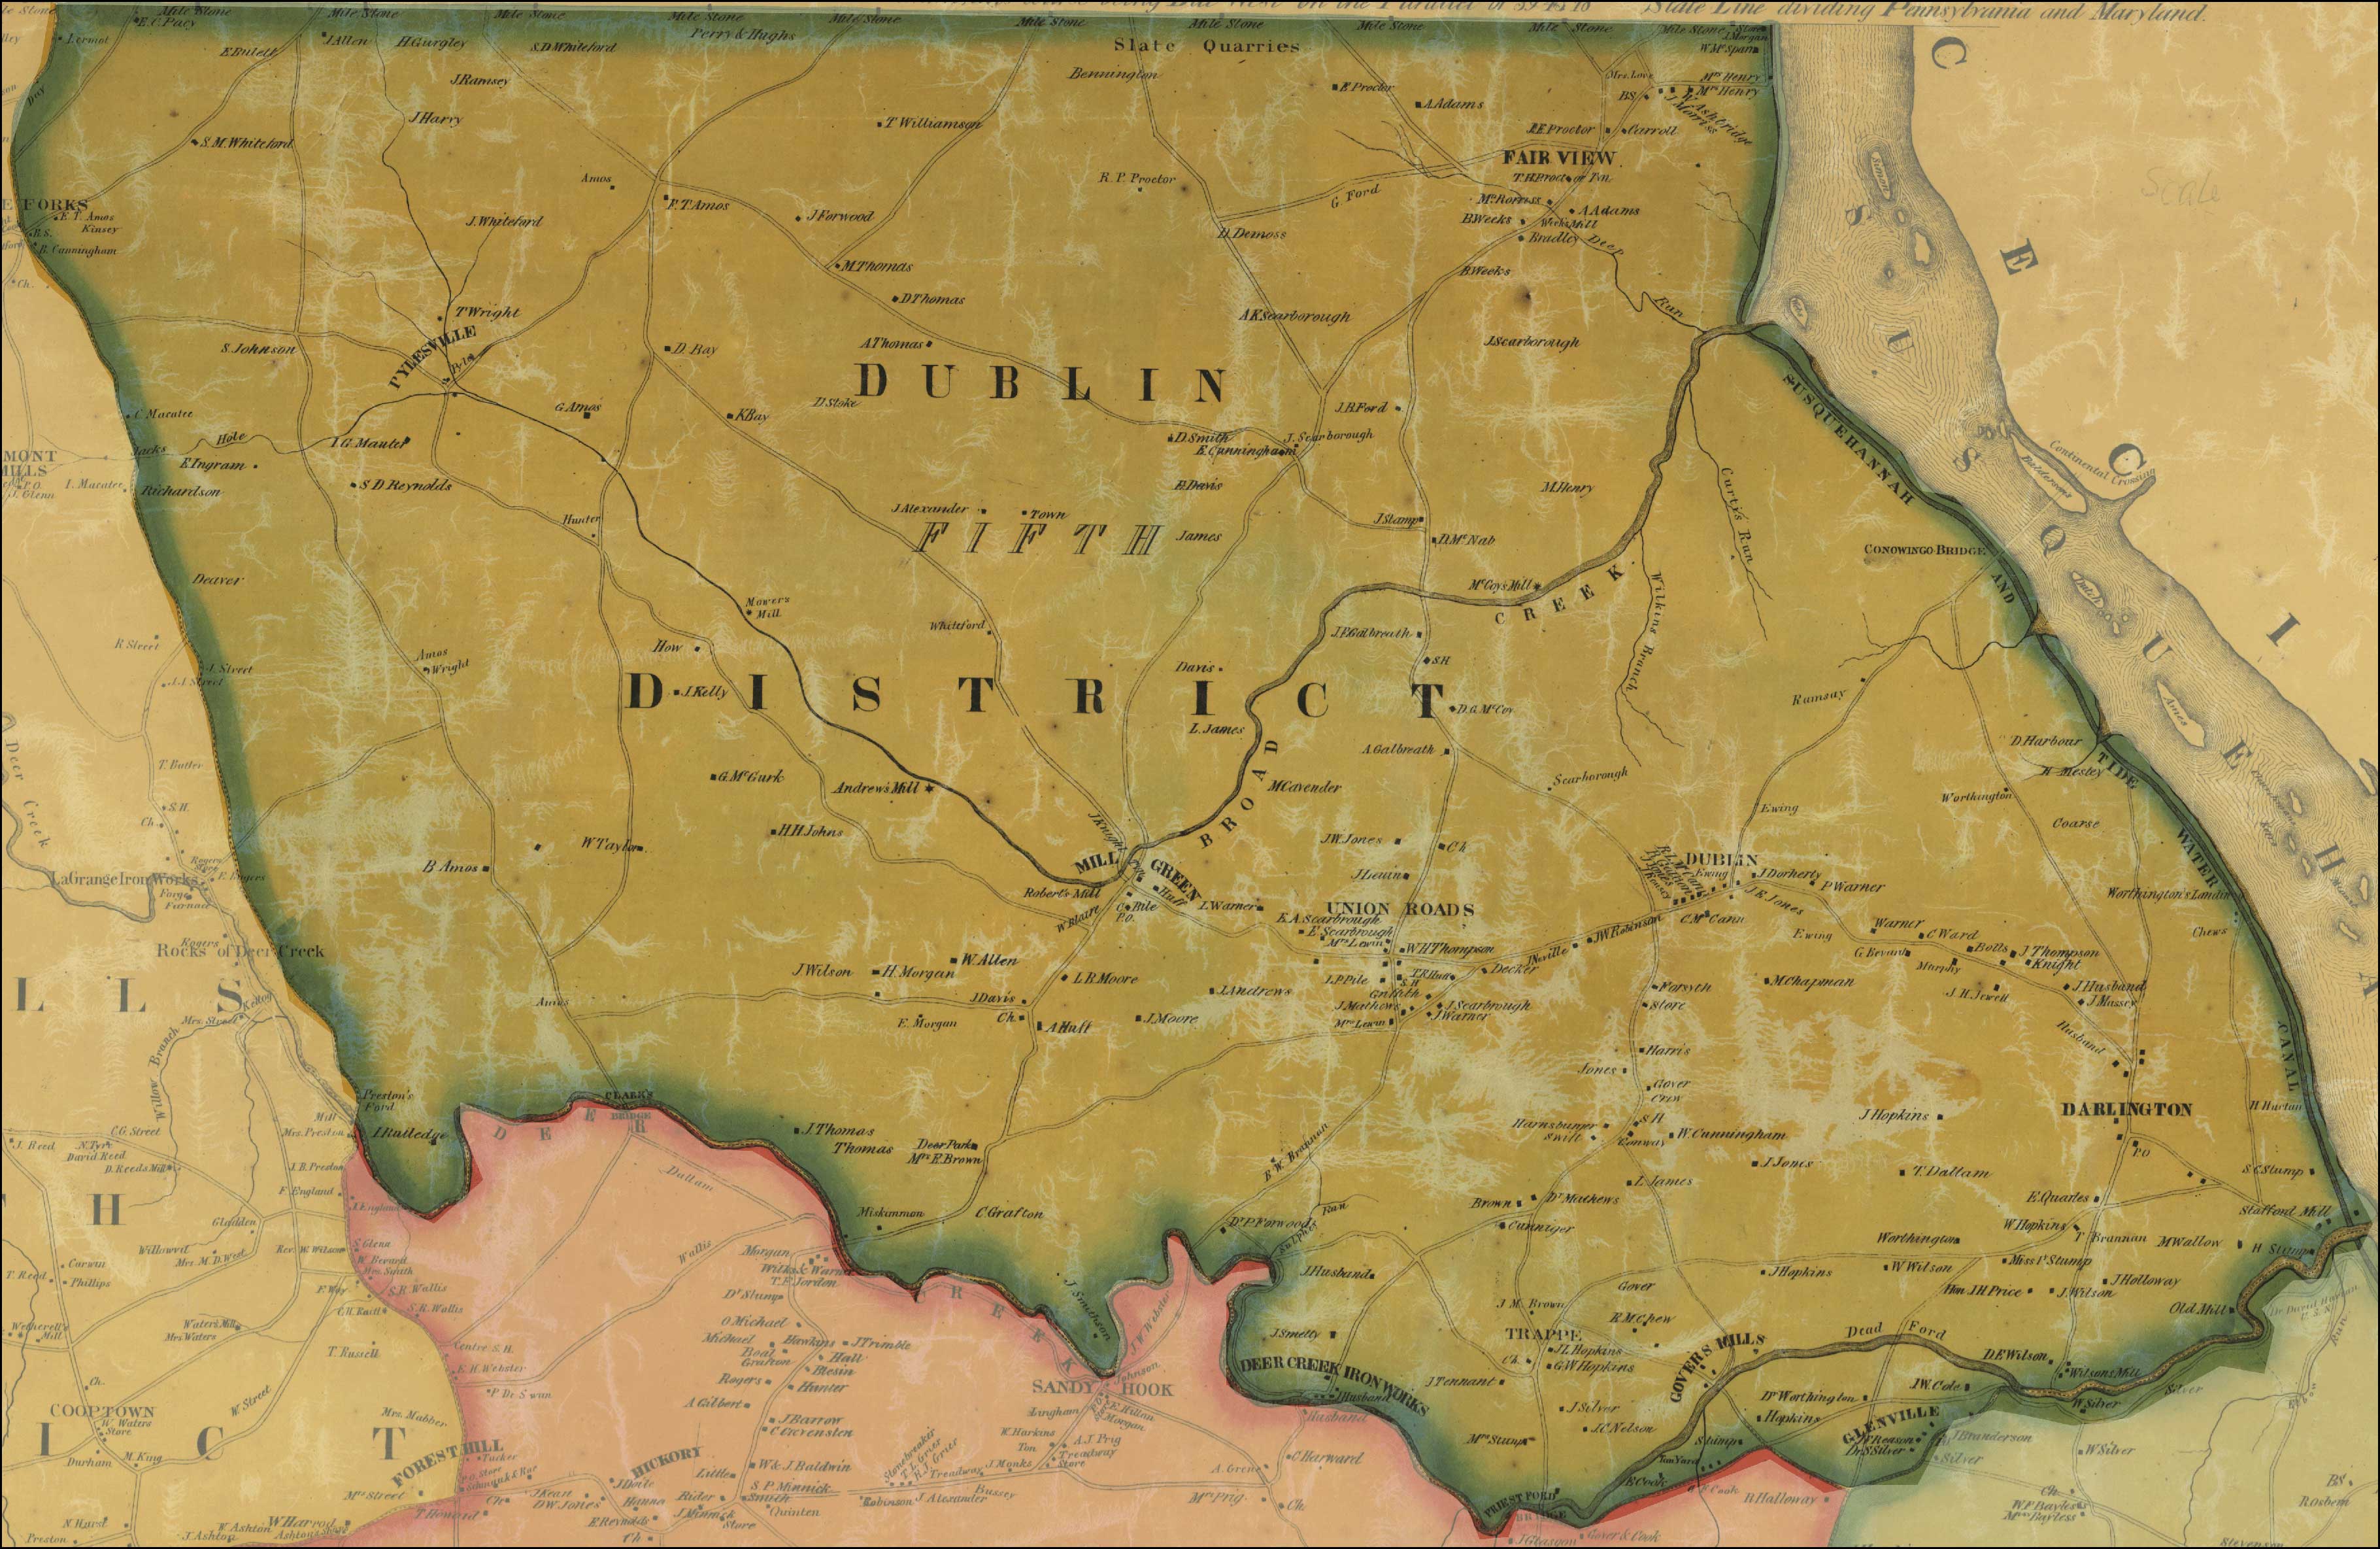 Jennings and Herrick, Map of Harford County, 1858, Library of Congress, MSA SC 1213-1